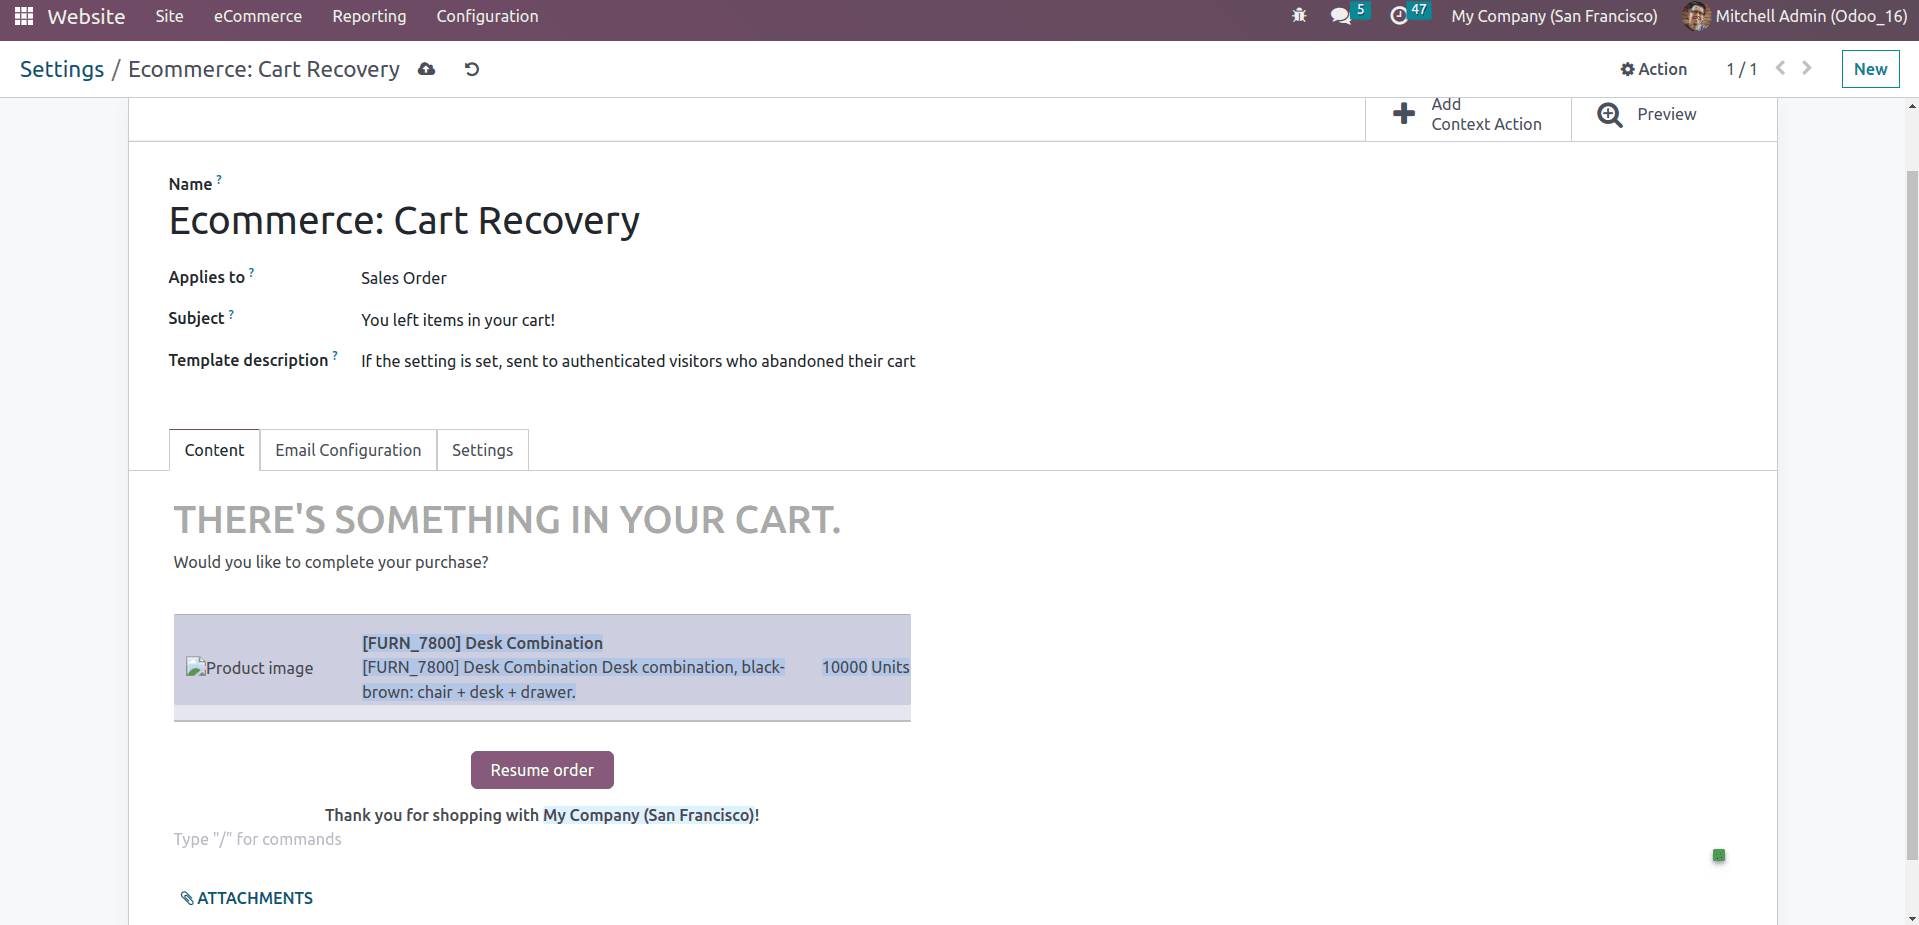 Abandoned Carts & Abandoned Checkout Emails in Odoo 16 Website App-cybrosys